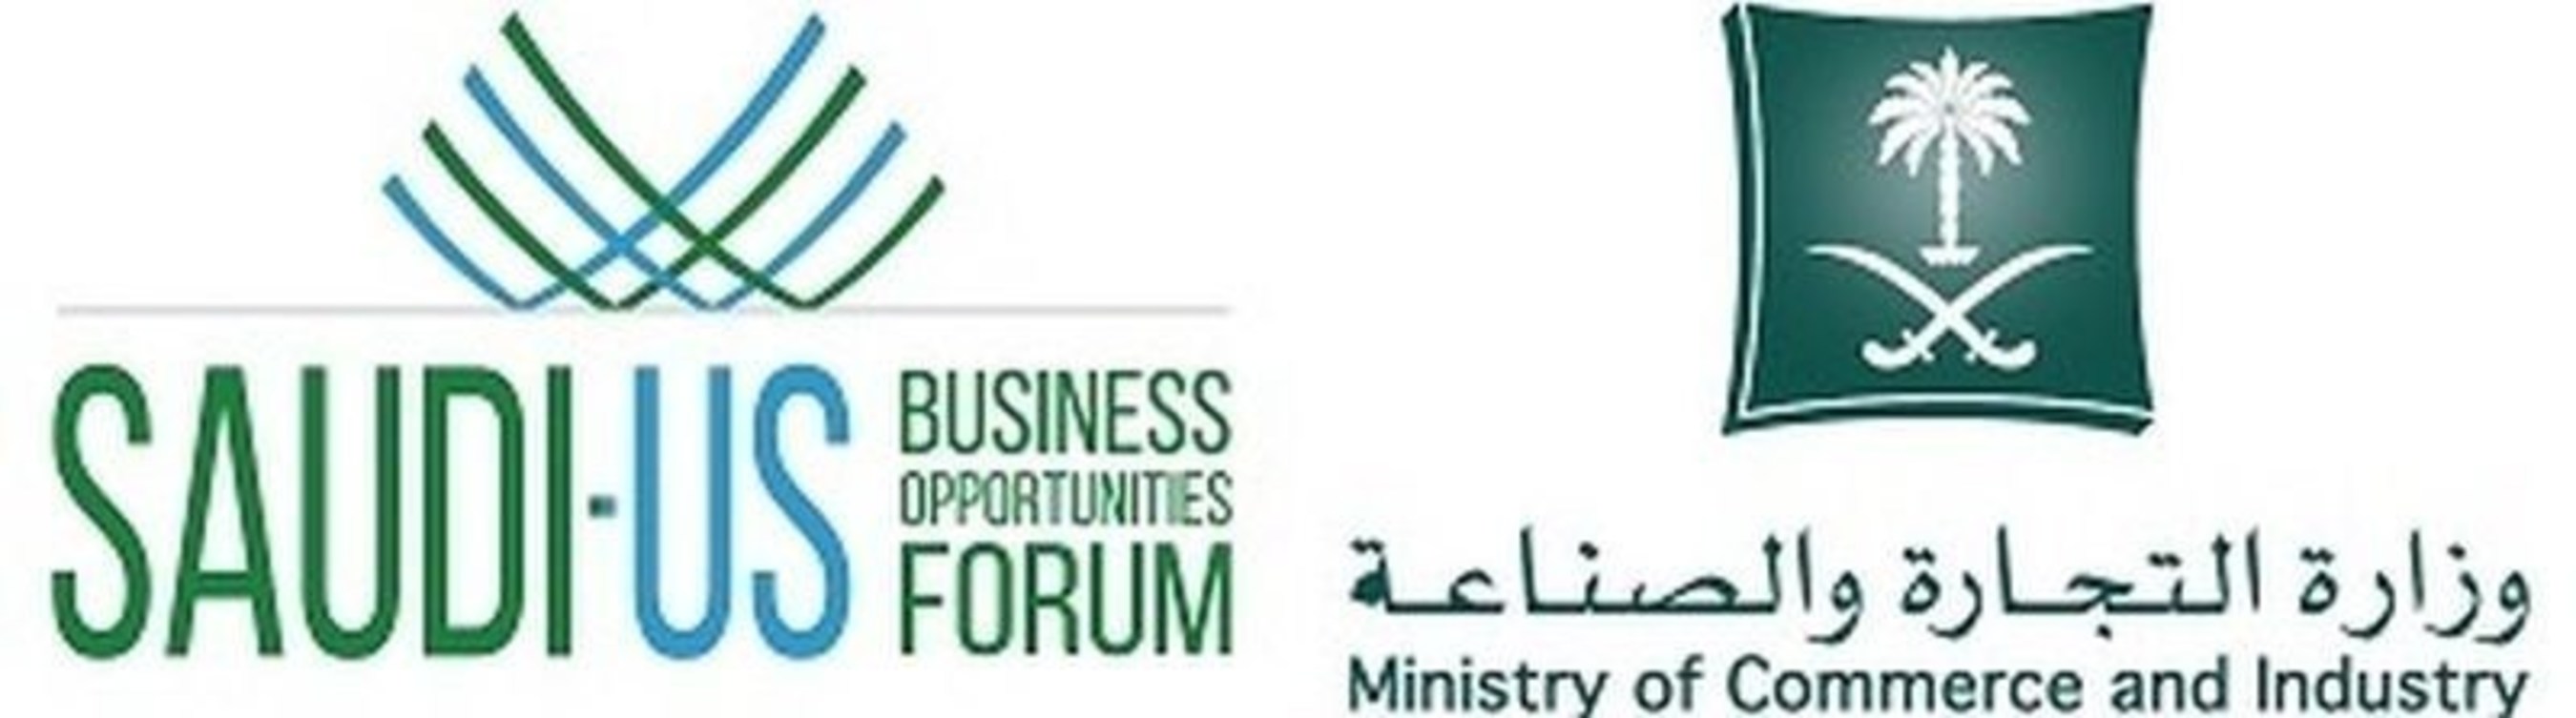 Saudi-US Business Opportunities Forum logo (PRNewsFoto/Ministry of Commerce & Industry)